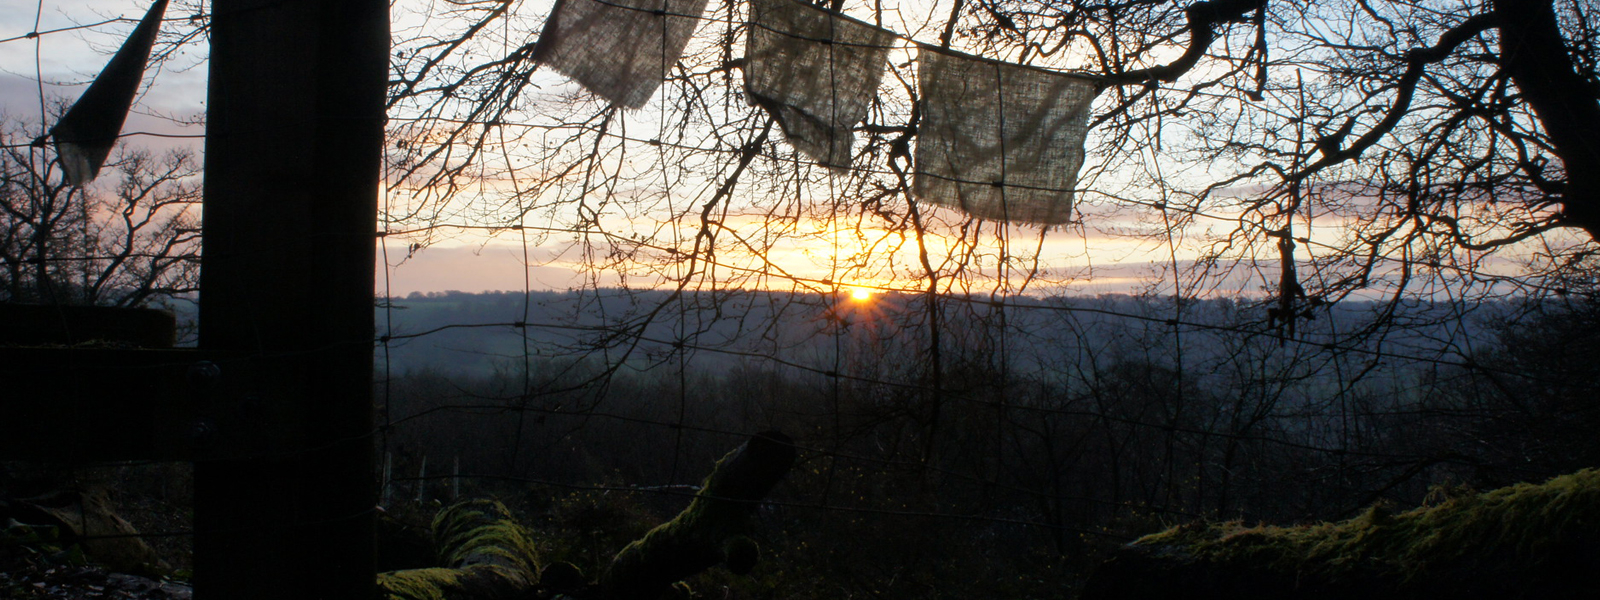 Prayer flags in front of a valley with a beautiful sun rising over the distant hill